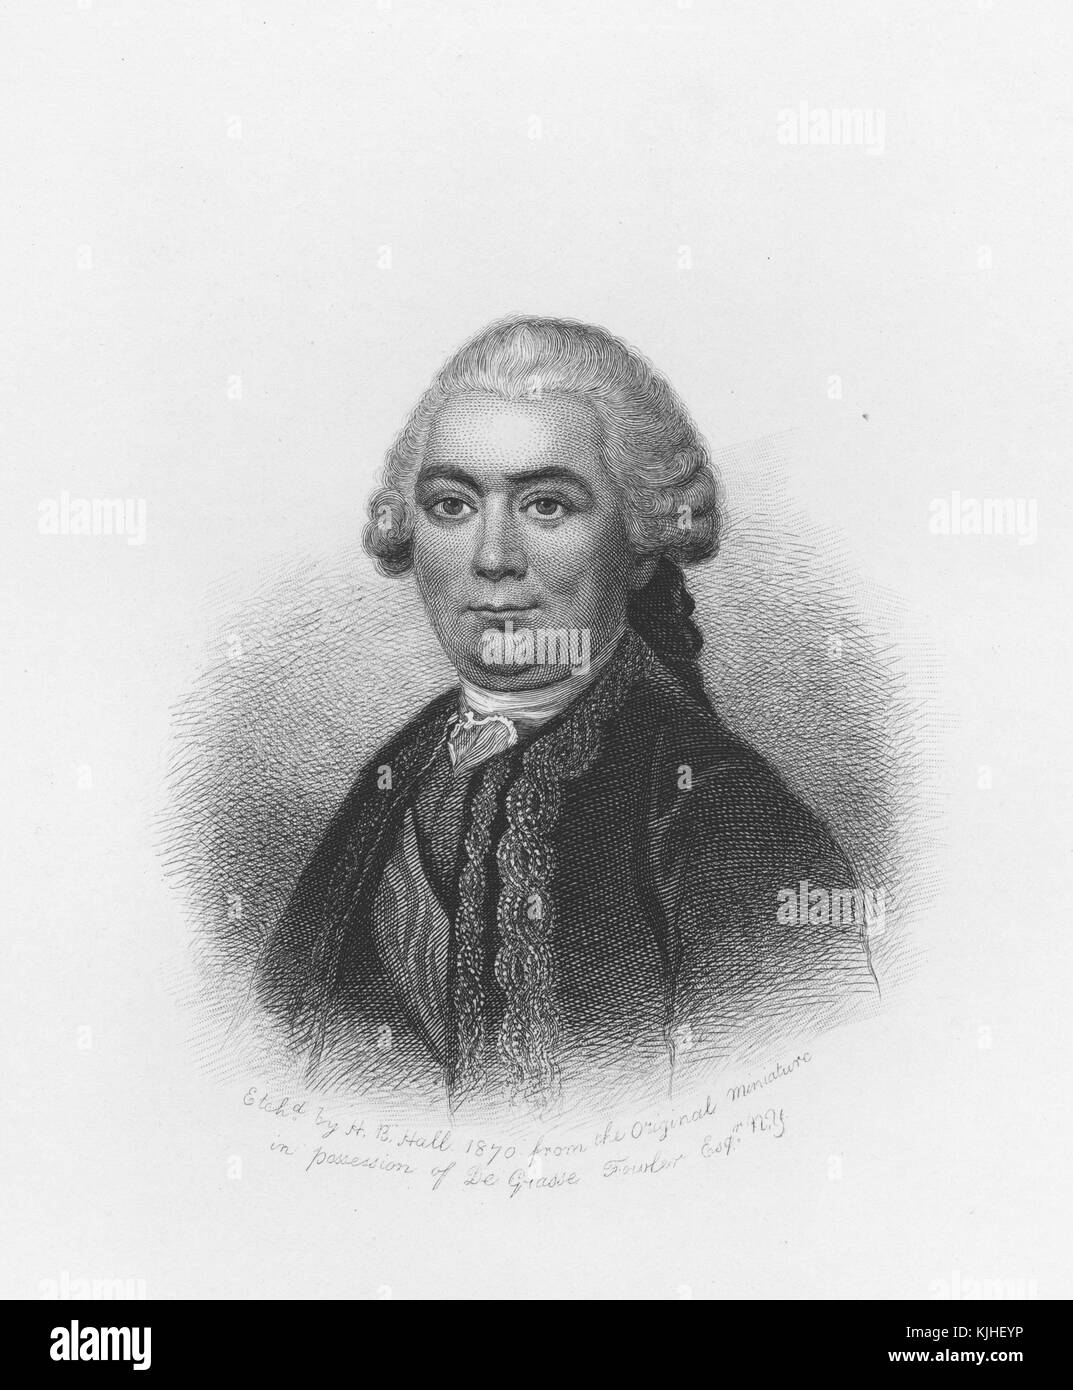 An etching from a portrait of Francois Joseph Paul de Grasse, he was an admiral in the French navy, he is best known for his command of the French fleet during the Battle of the Chesapeake which prevented the British Royal Navy from reinforcing or evacuating Lieutenant General Lord Cornwallis forces, this led to a combined Colonial and French victory during the Siege of Yorktown effectively ending the American Revolutionary War, 1839. From the New York Public Library. Stock Photo